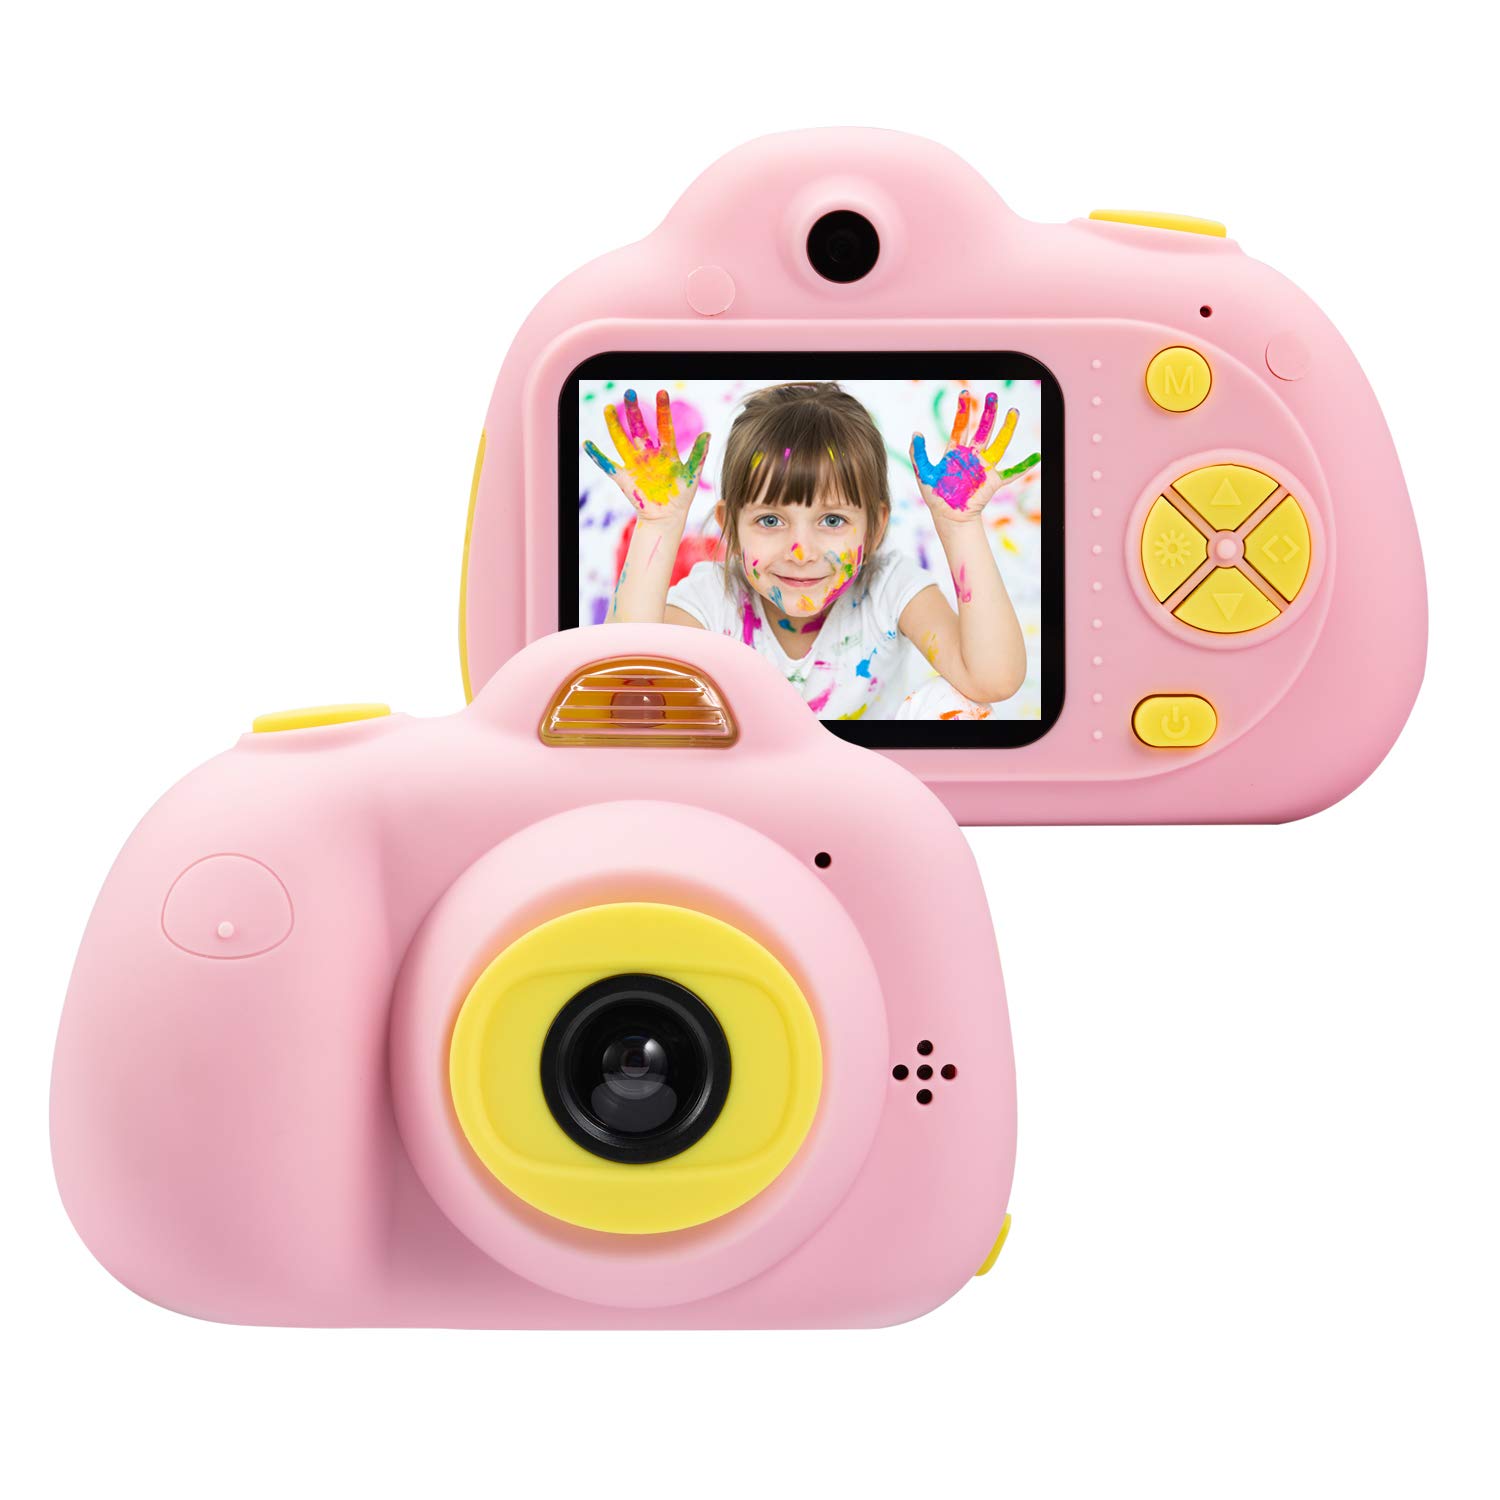 omzer Kids Camera Gifts for 4-8 Year Old Girls, Shockproof Cameras Great Gift Mini Child Camcorderr for Little Girl with Soft Silicone Shell for Outdoor Play,Pink(16GB Memory Card Included)